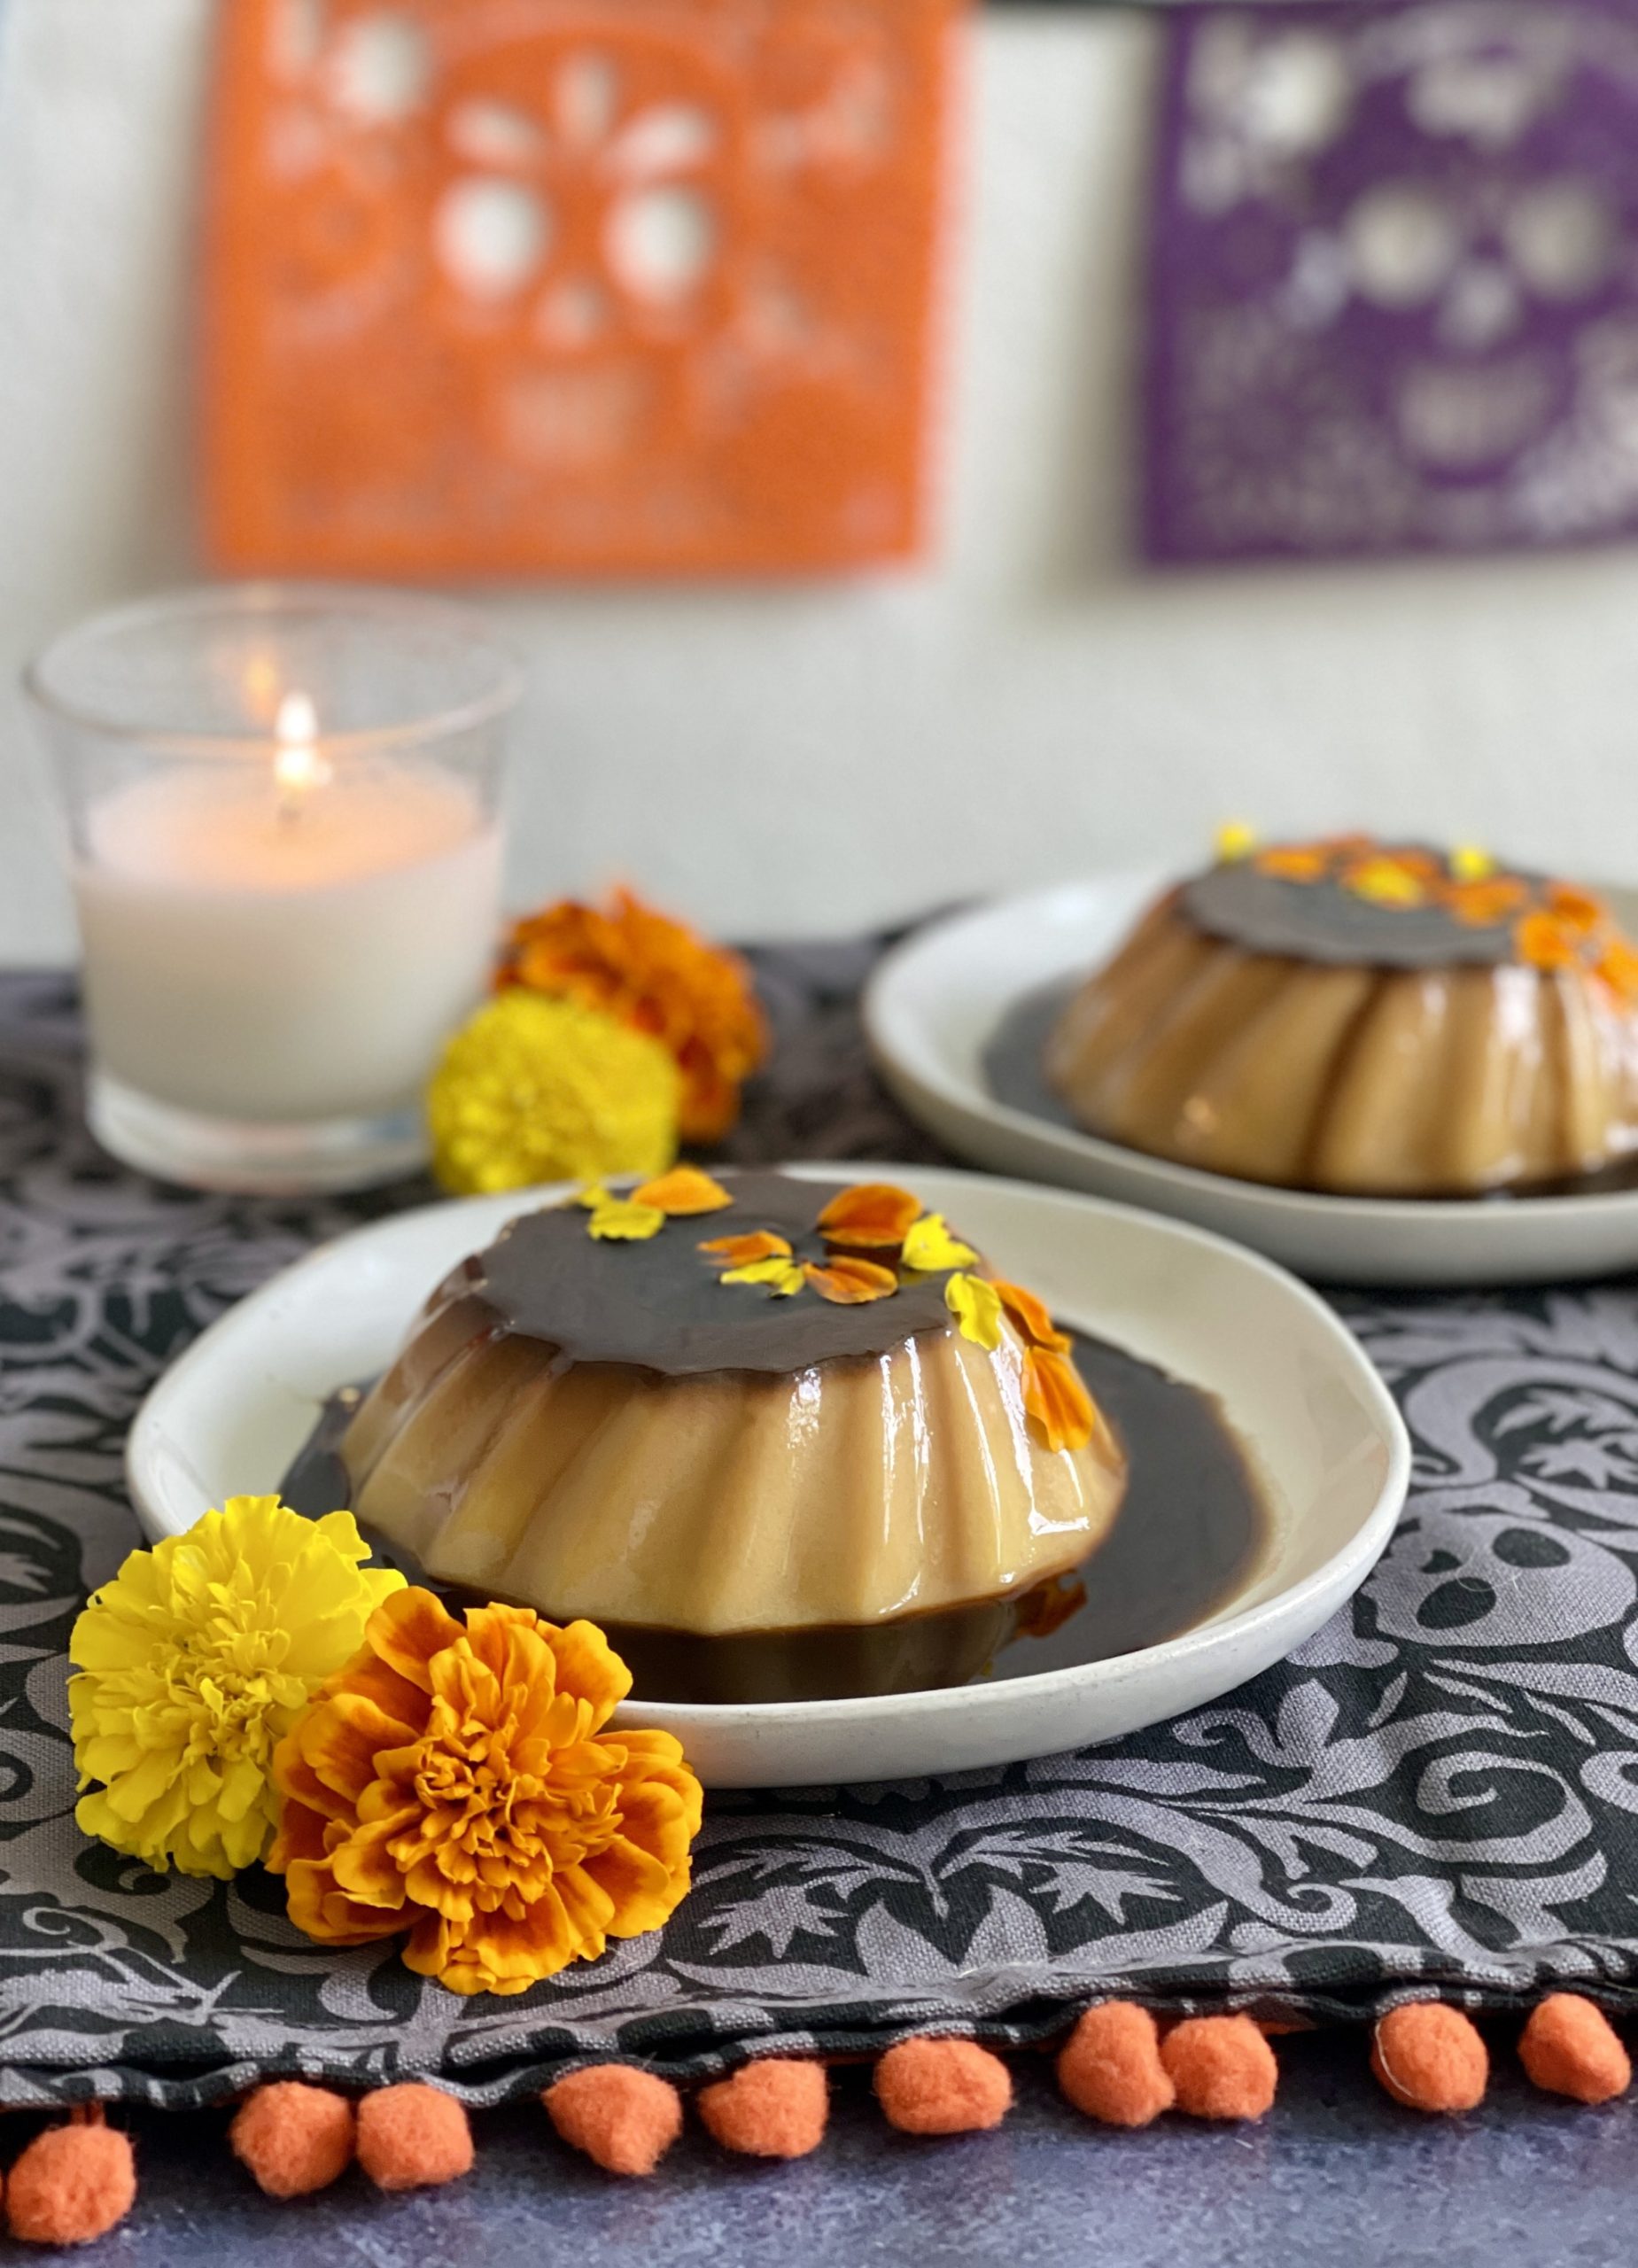 Marigold (cempasuchil) flan recipe for Day of the Dead